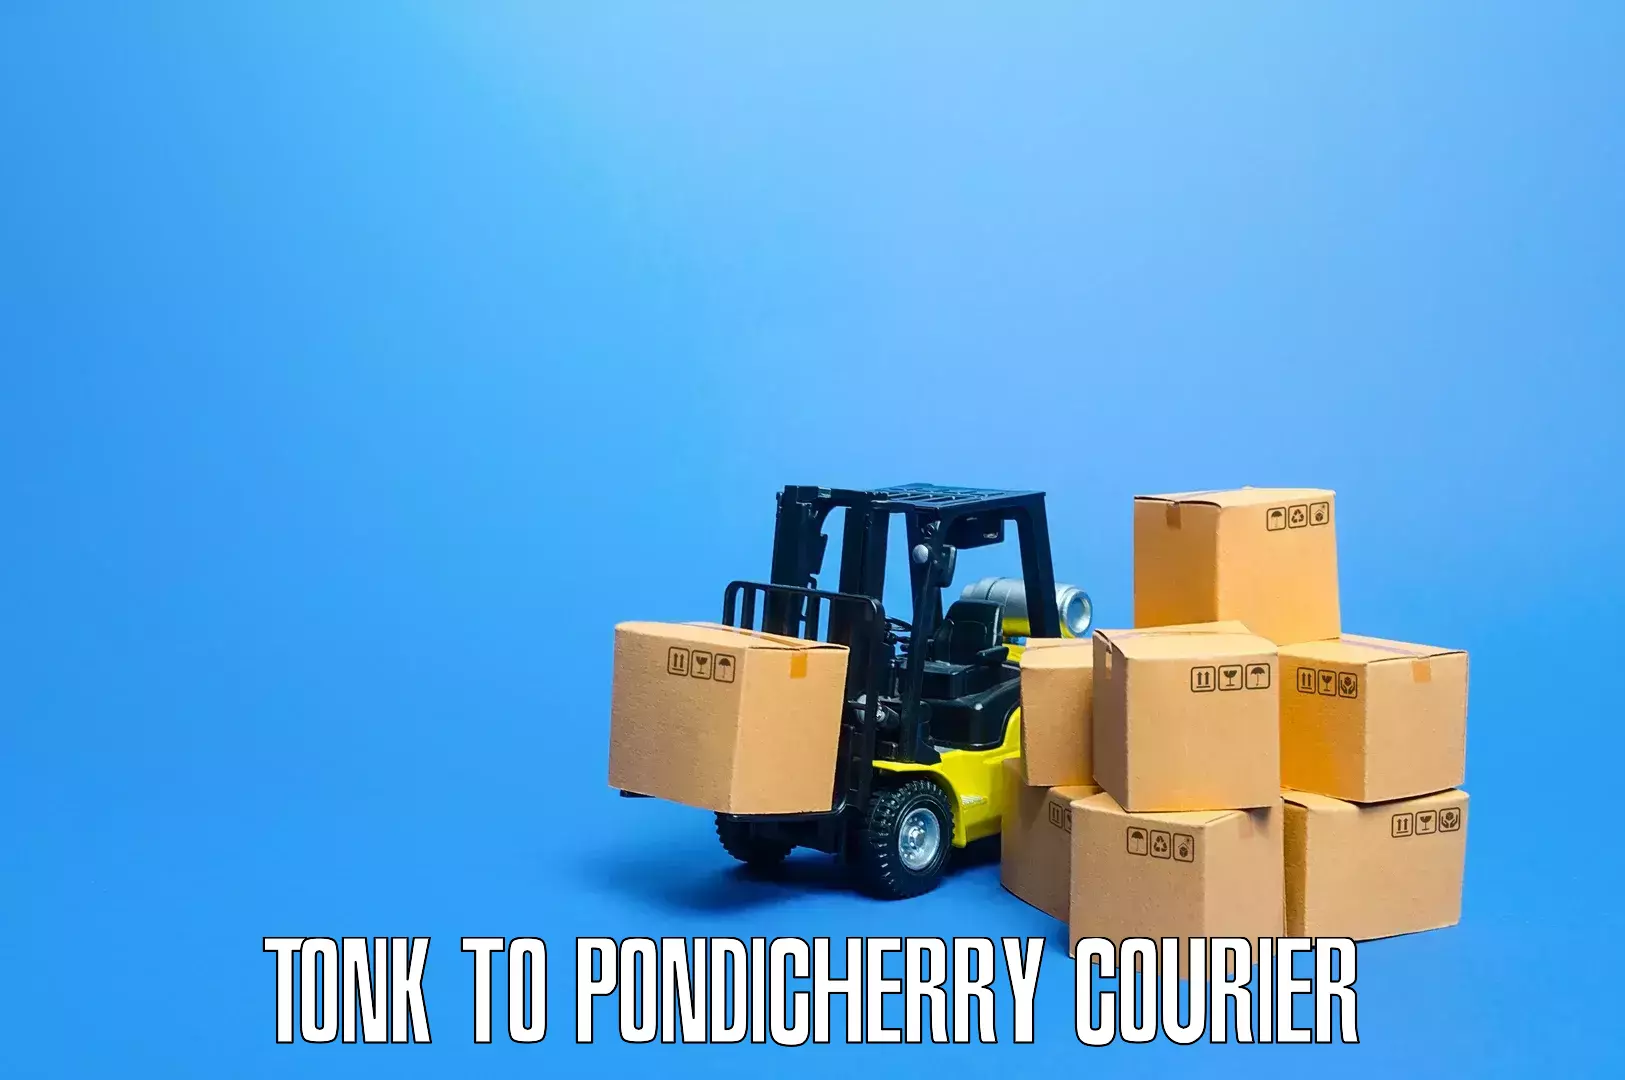 Furniture moving experts Tonk to Pondicherry